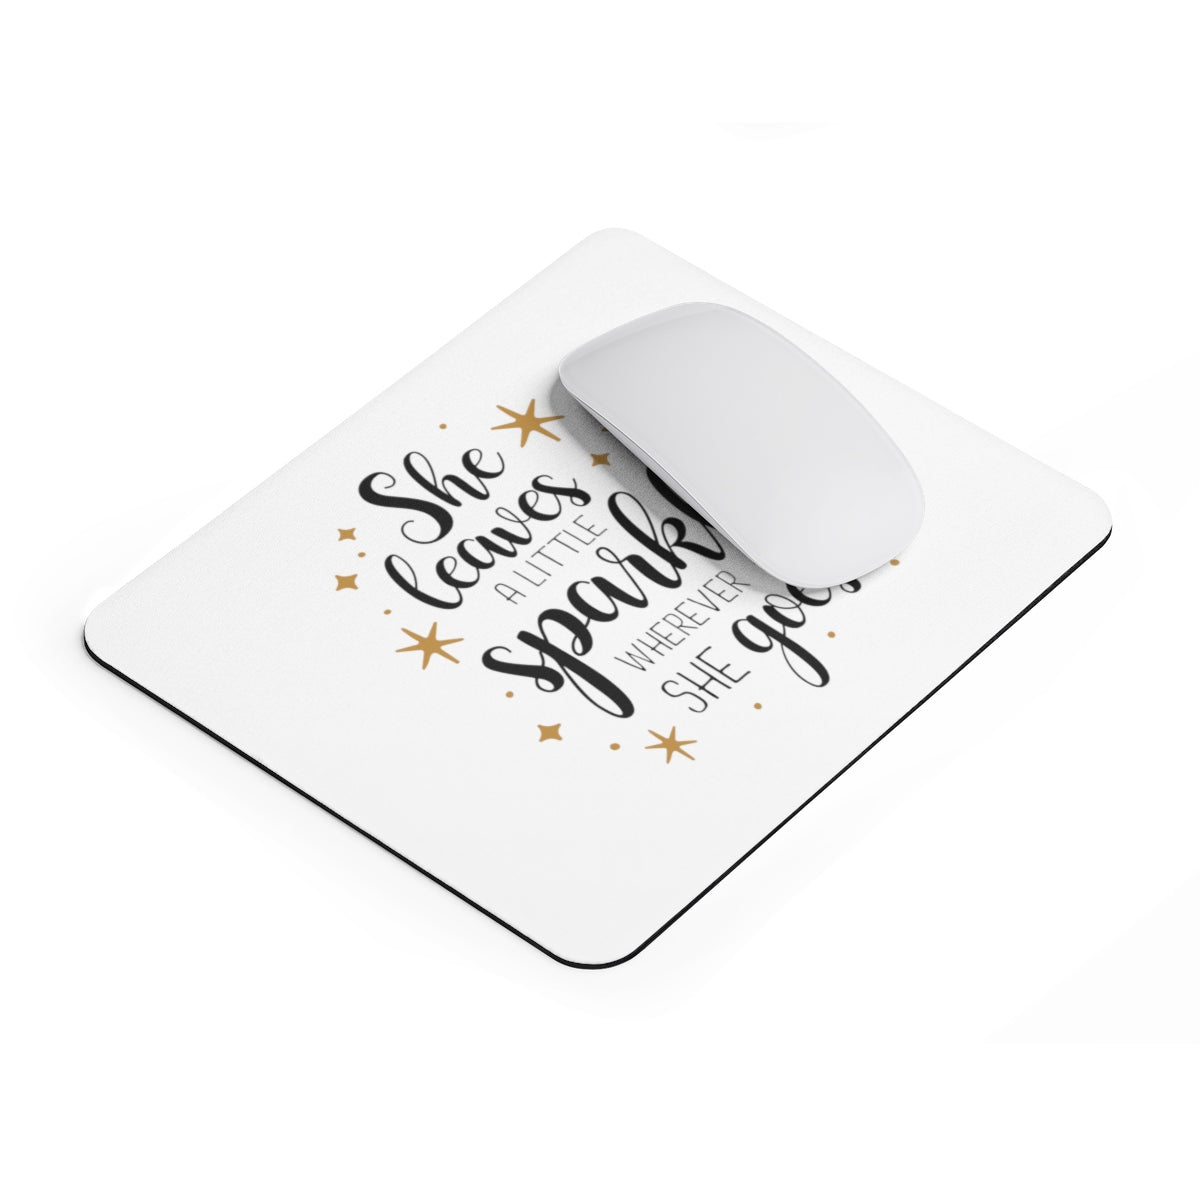 She Leaves A Little Sparkle Wherever She Goes Mousepad - Inspired By Savy